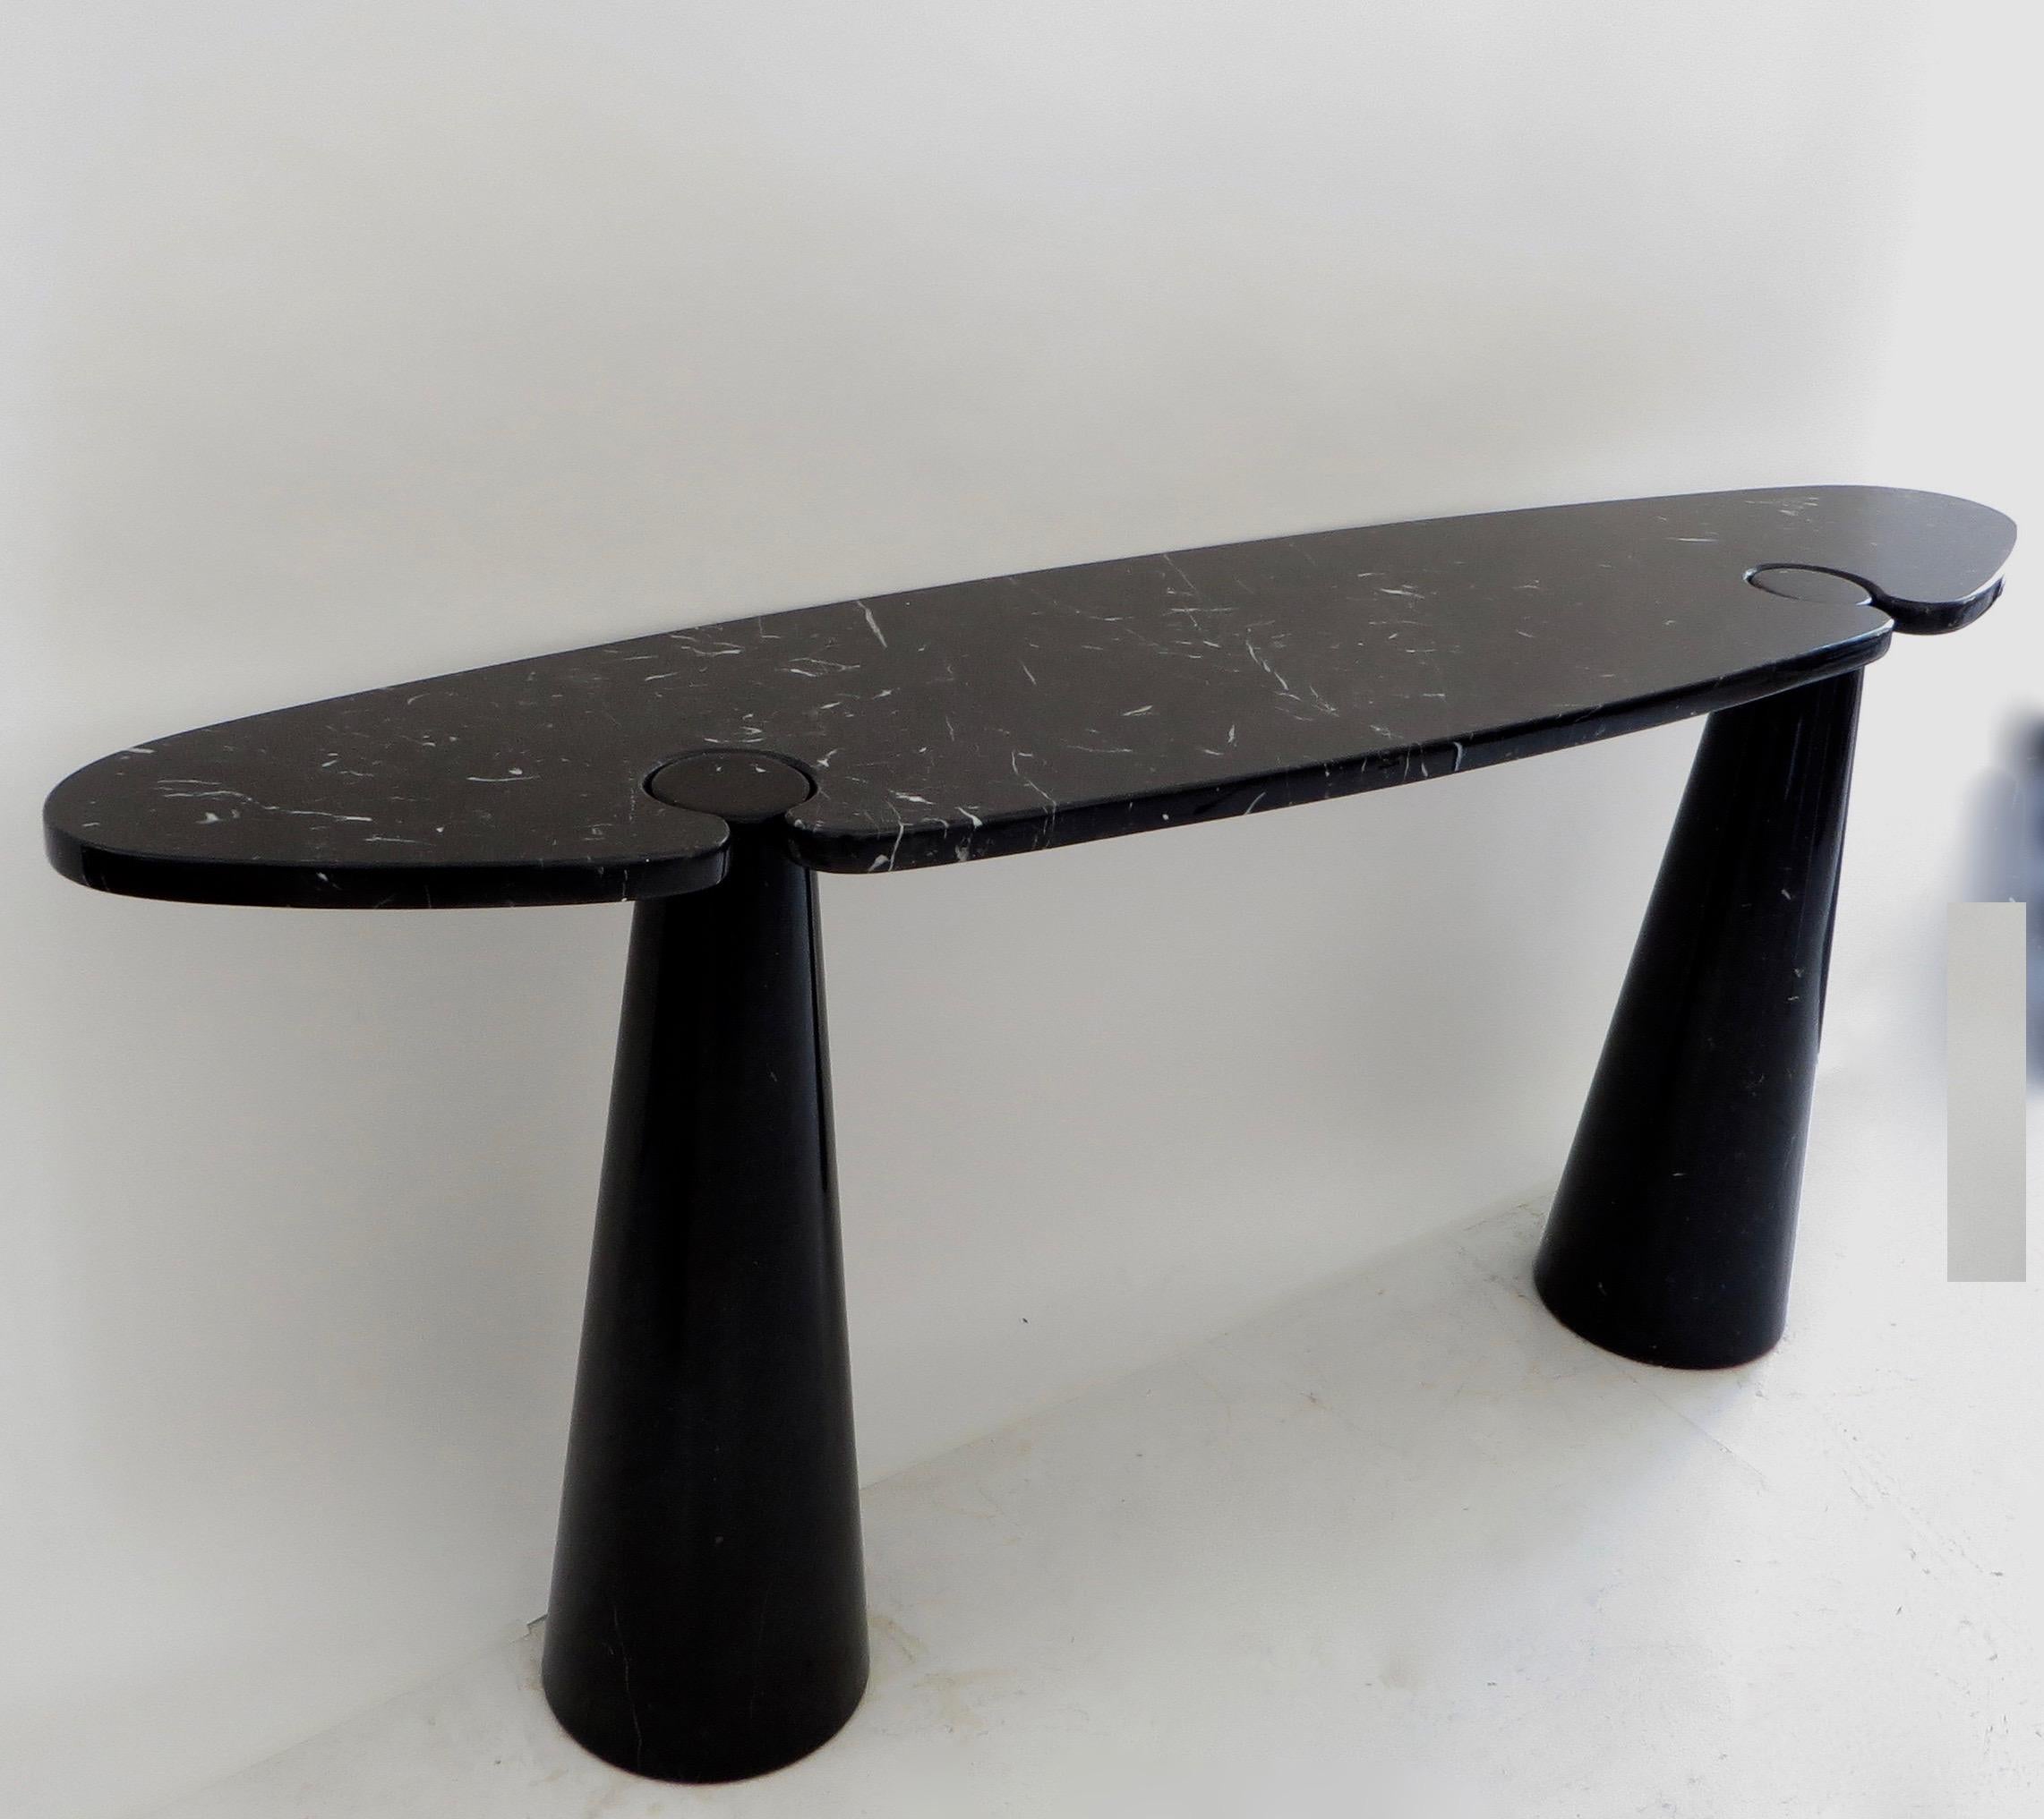 Angelo Mangiarotti vintage iconic Italian console Eros collection for Skipper, circa 1971.
The black or nero Marquina marble is nicely veined.
The top sits on the conical legs in the iconic Mangiarotti finely designed architectural manner.
No